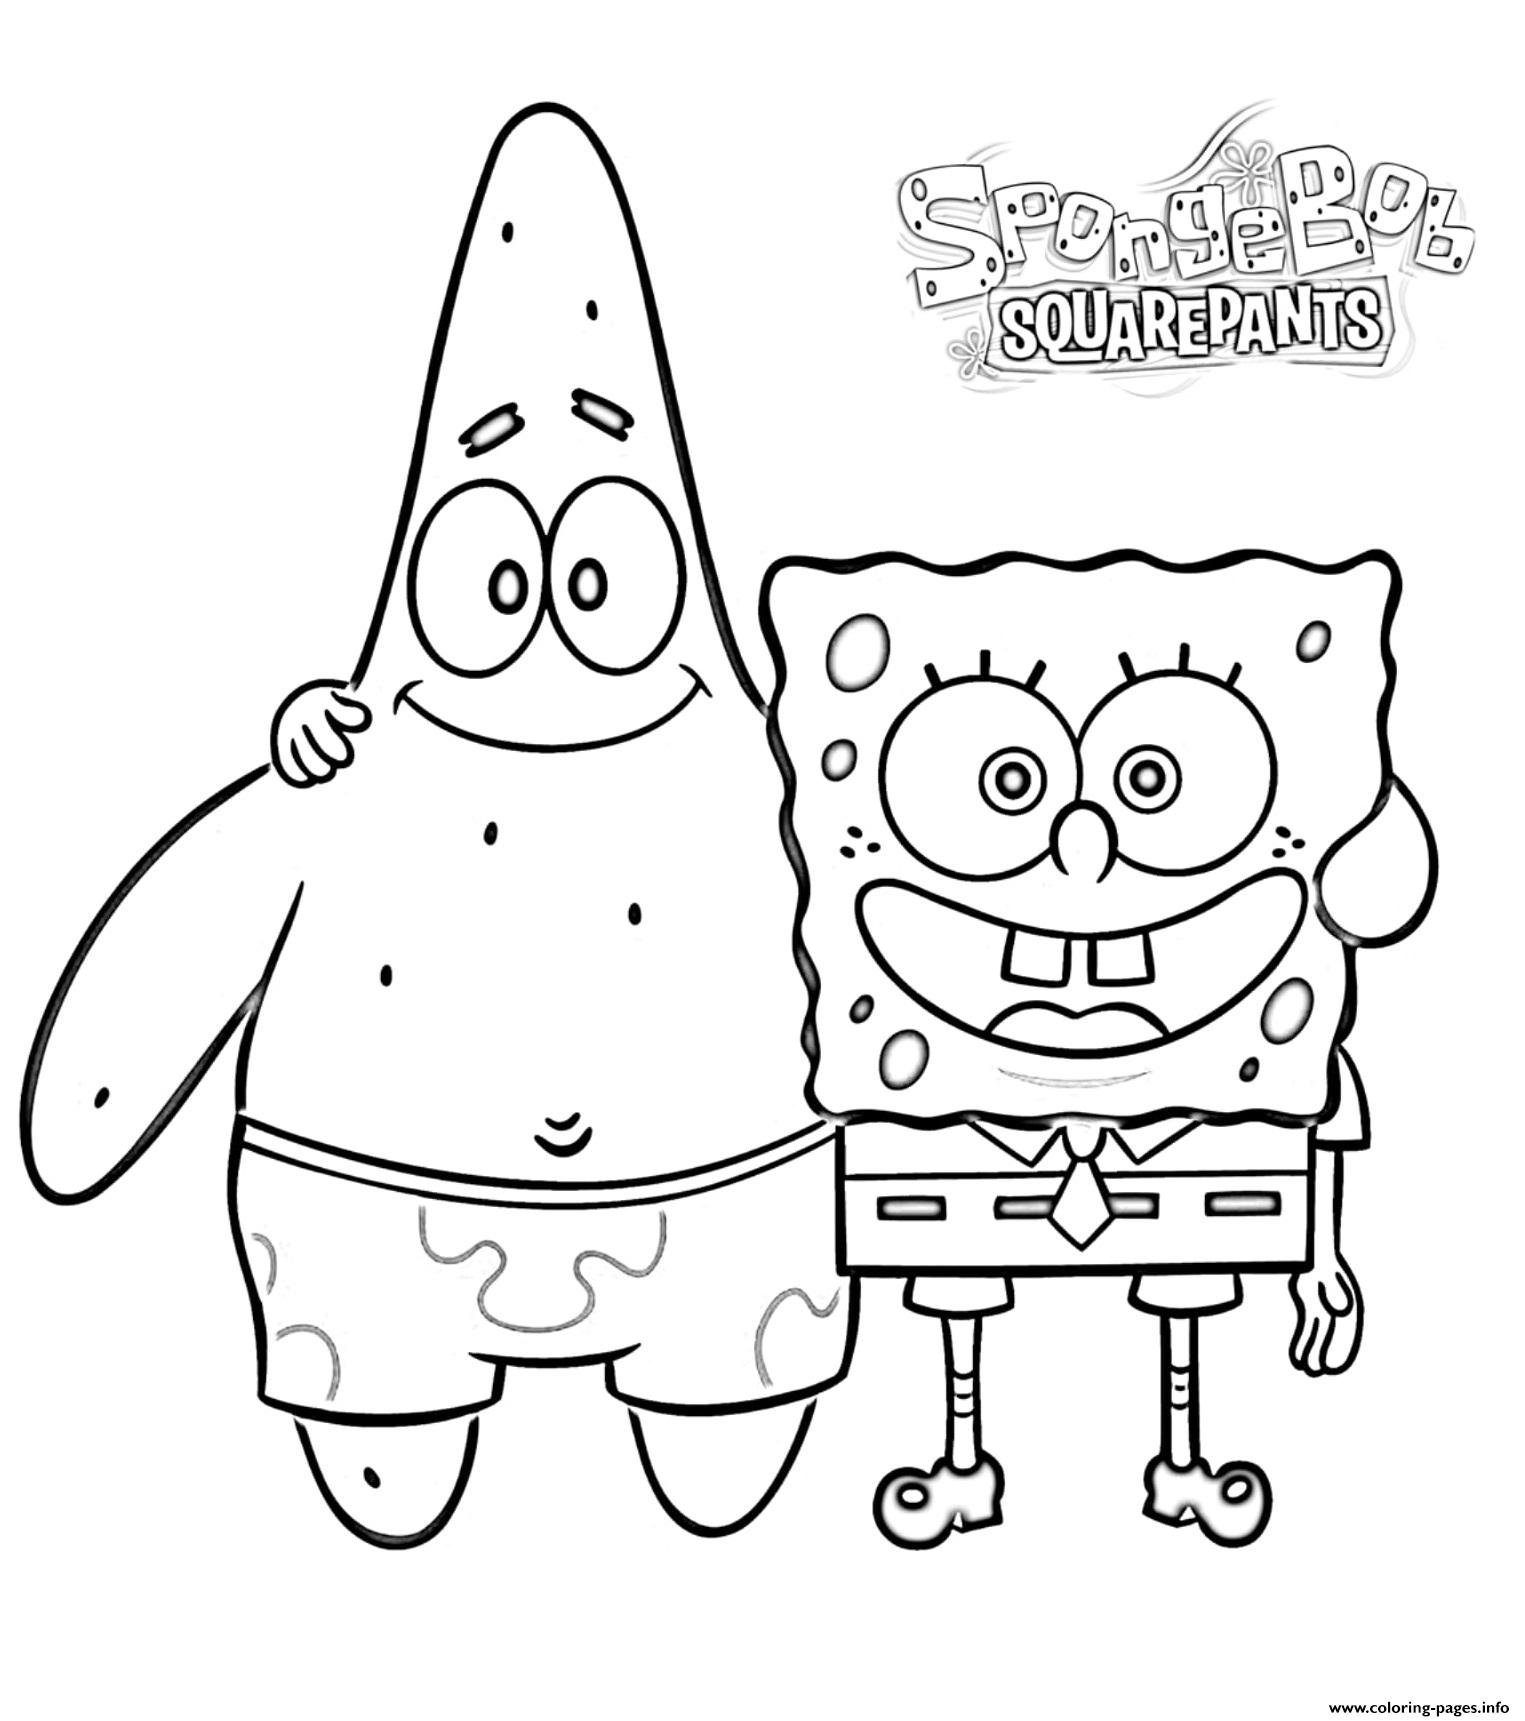 Spongebob And Patrick Friends Coloring page Printable